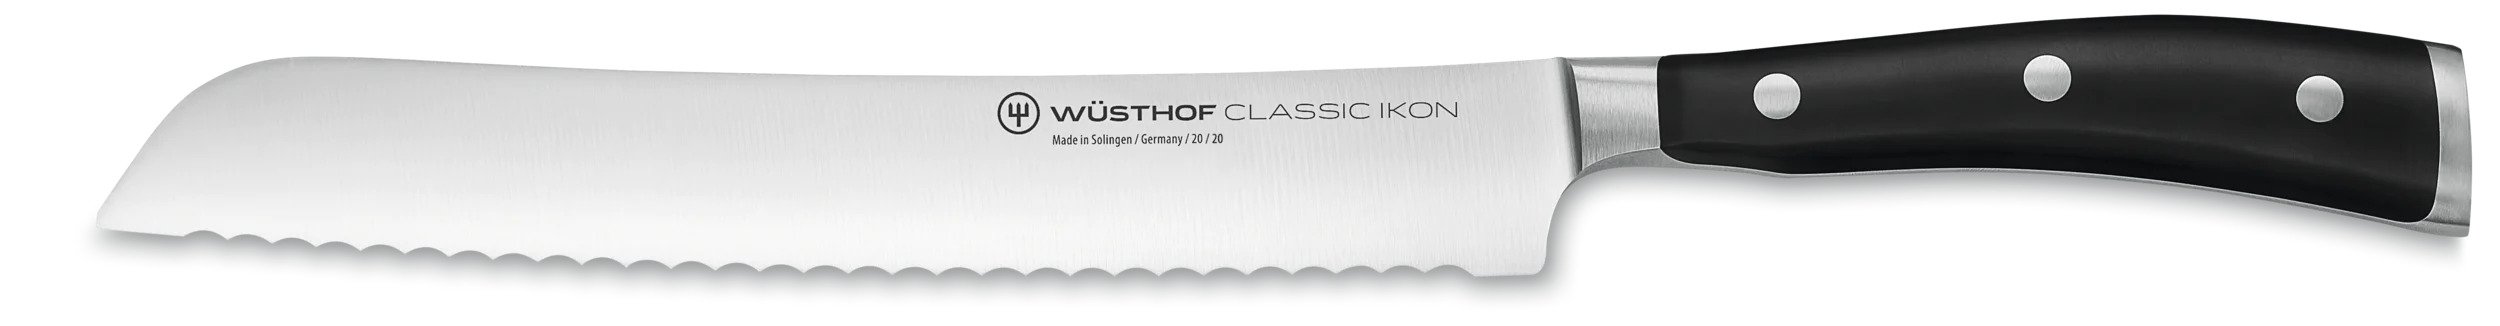 picture of a Wusthof German brand bread knife